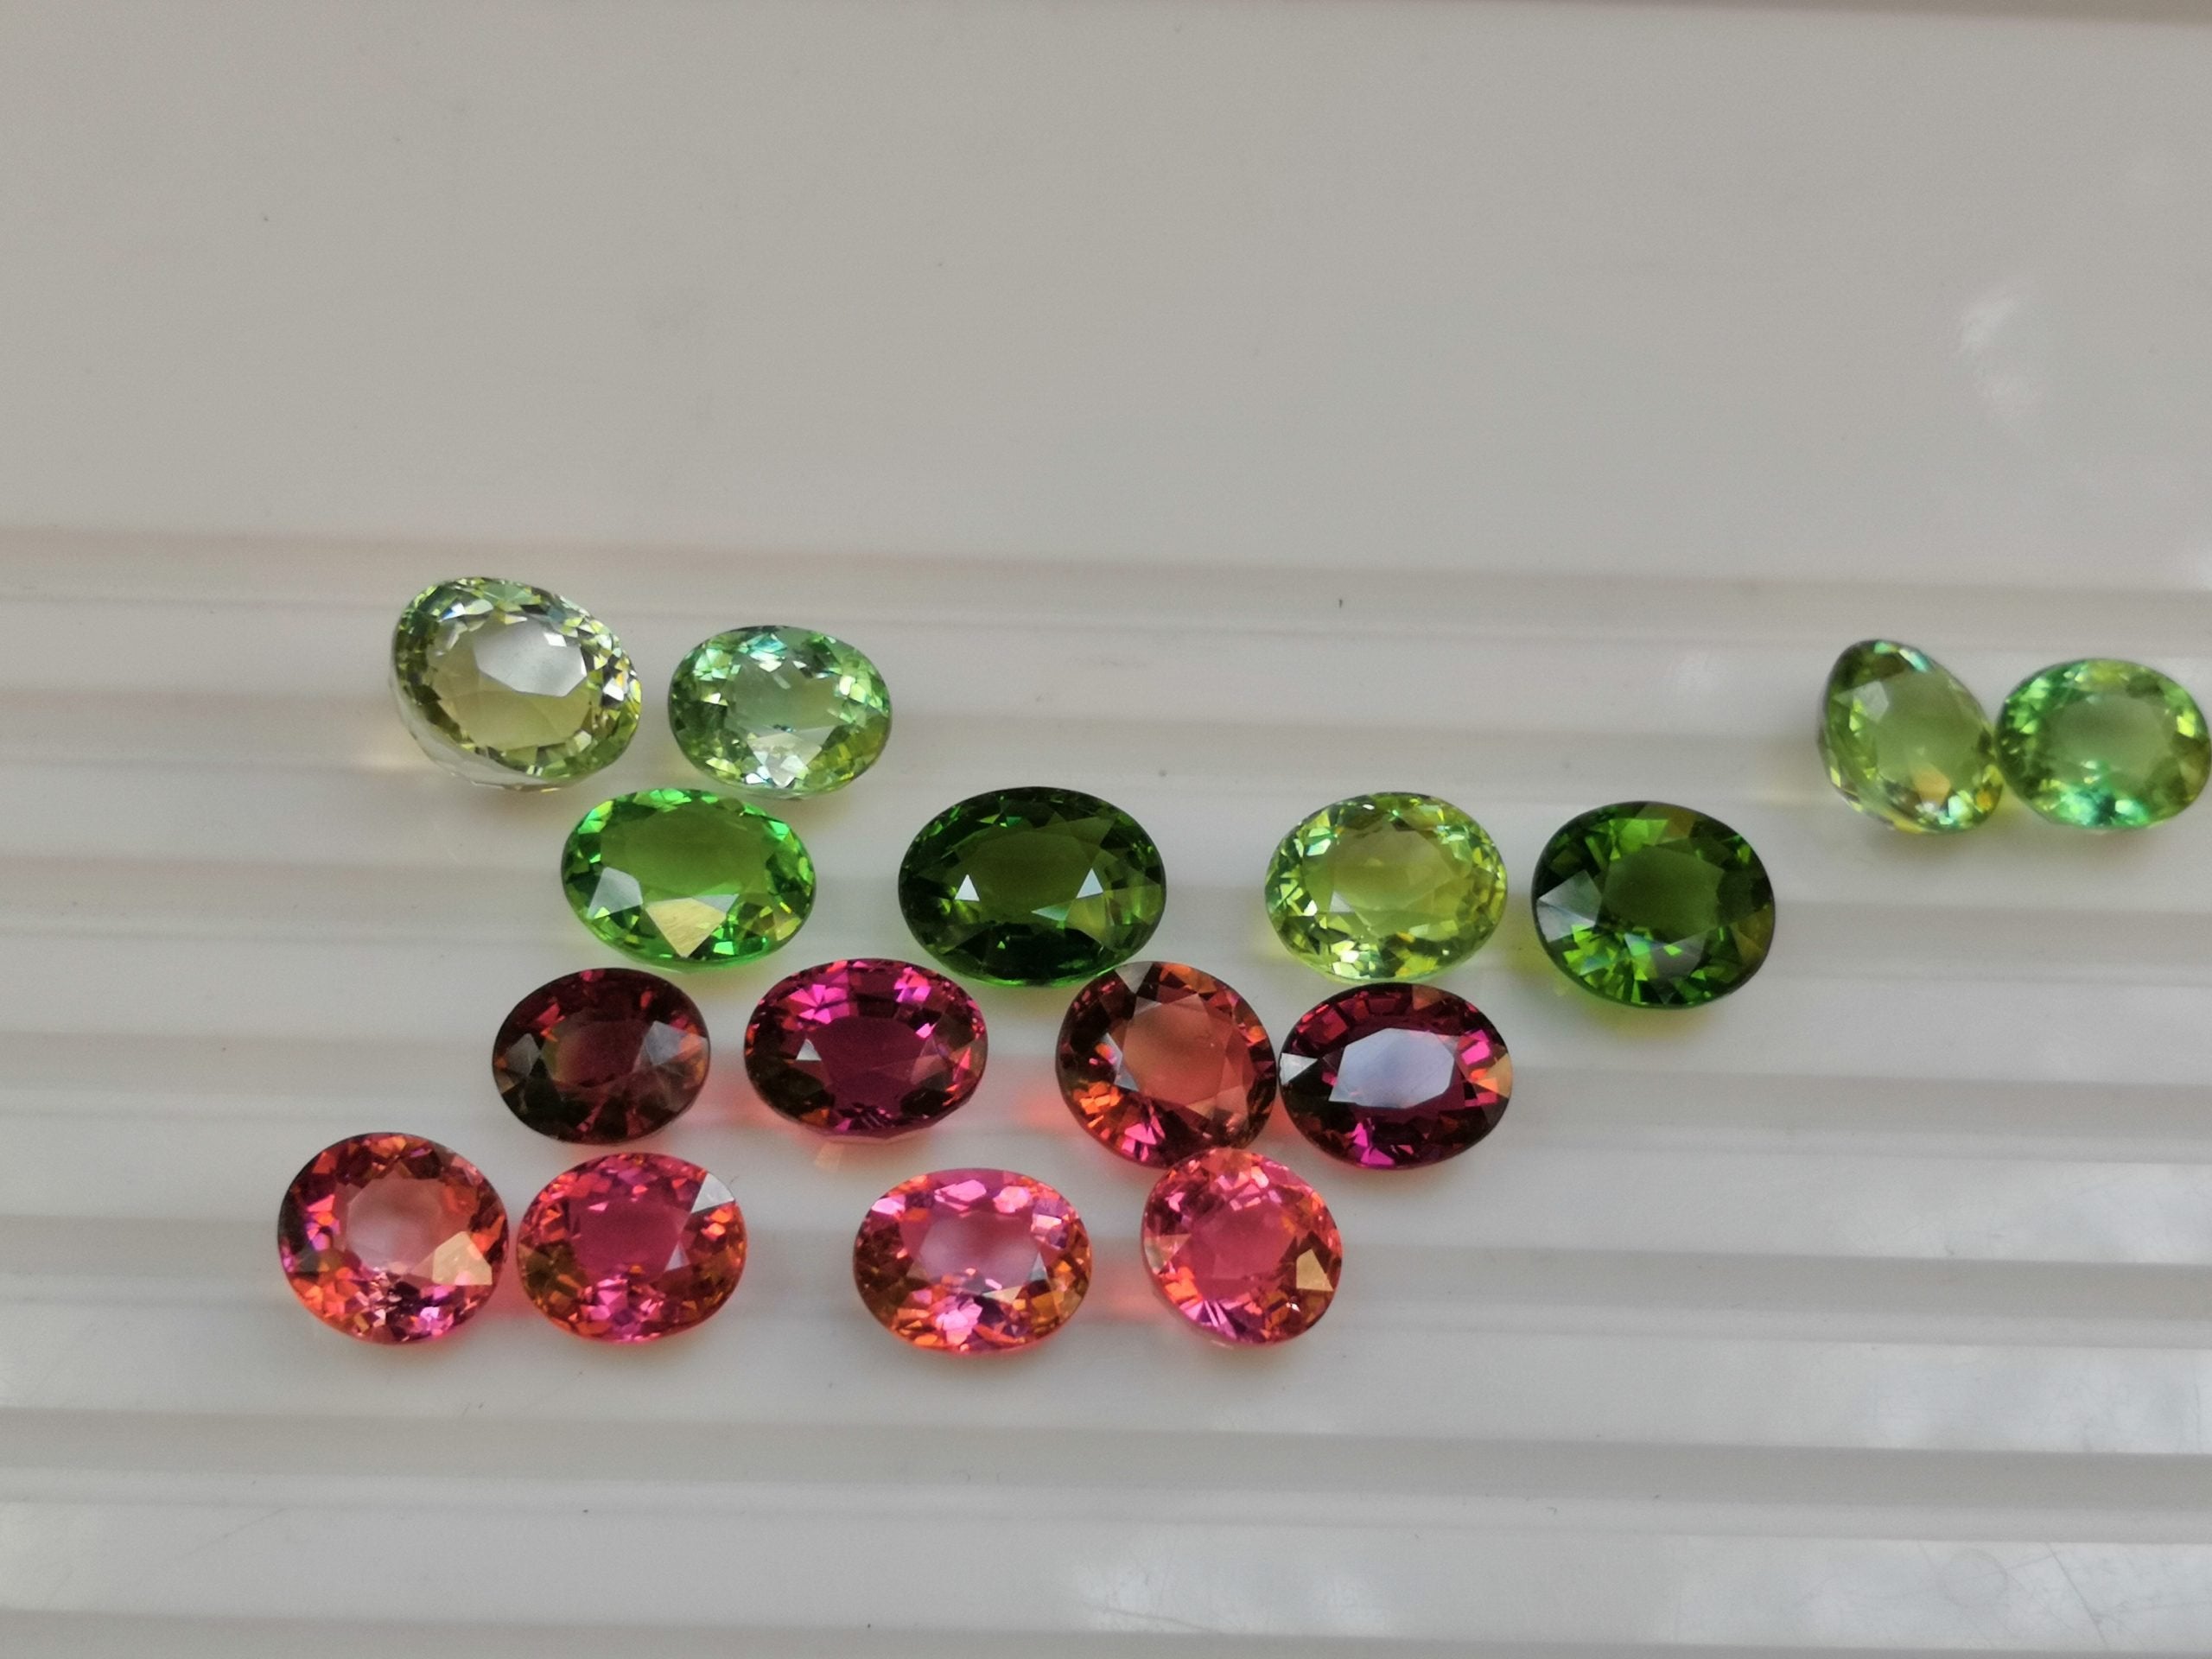 Very Stunning Faceted Tourmaline pieces for sale